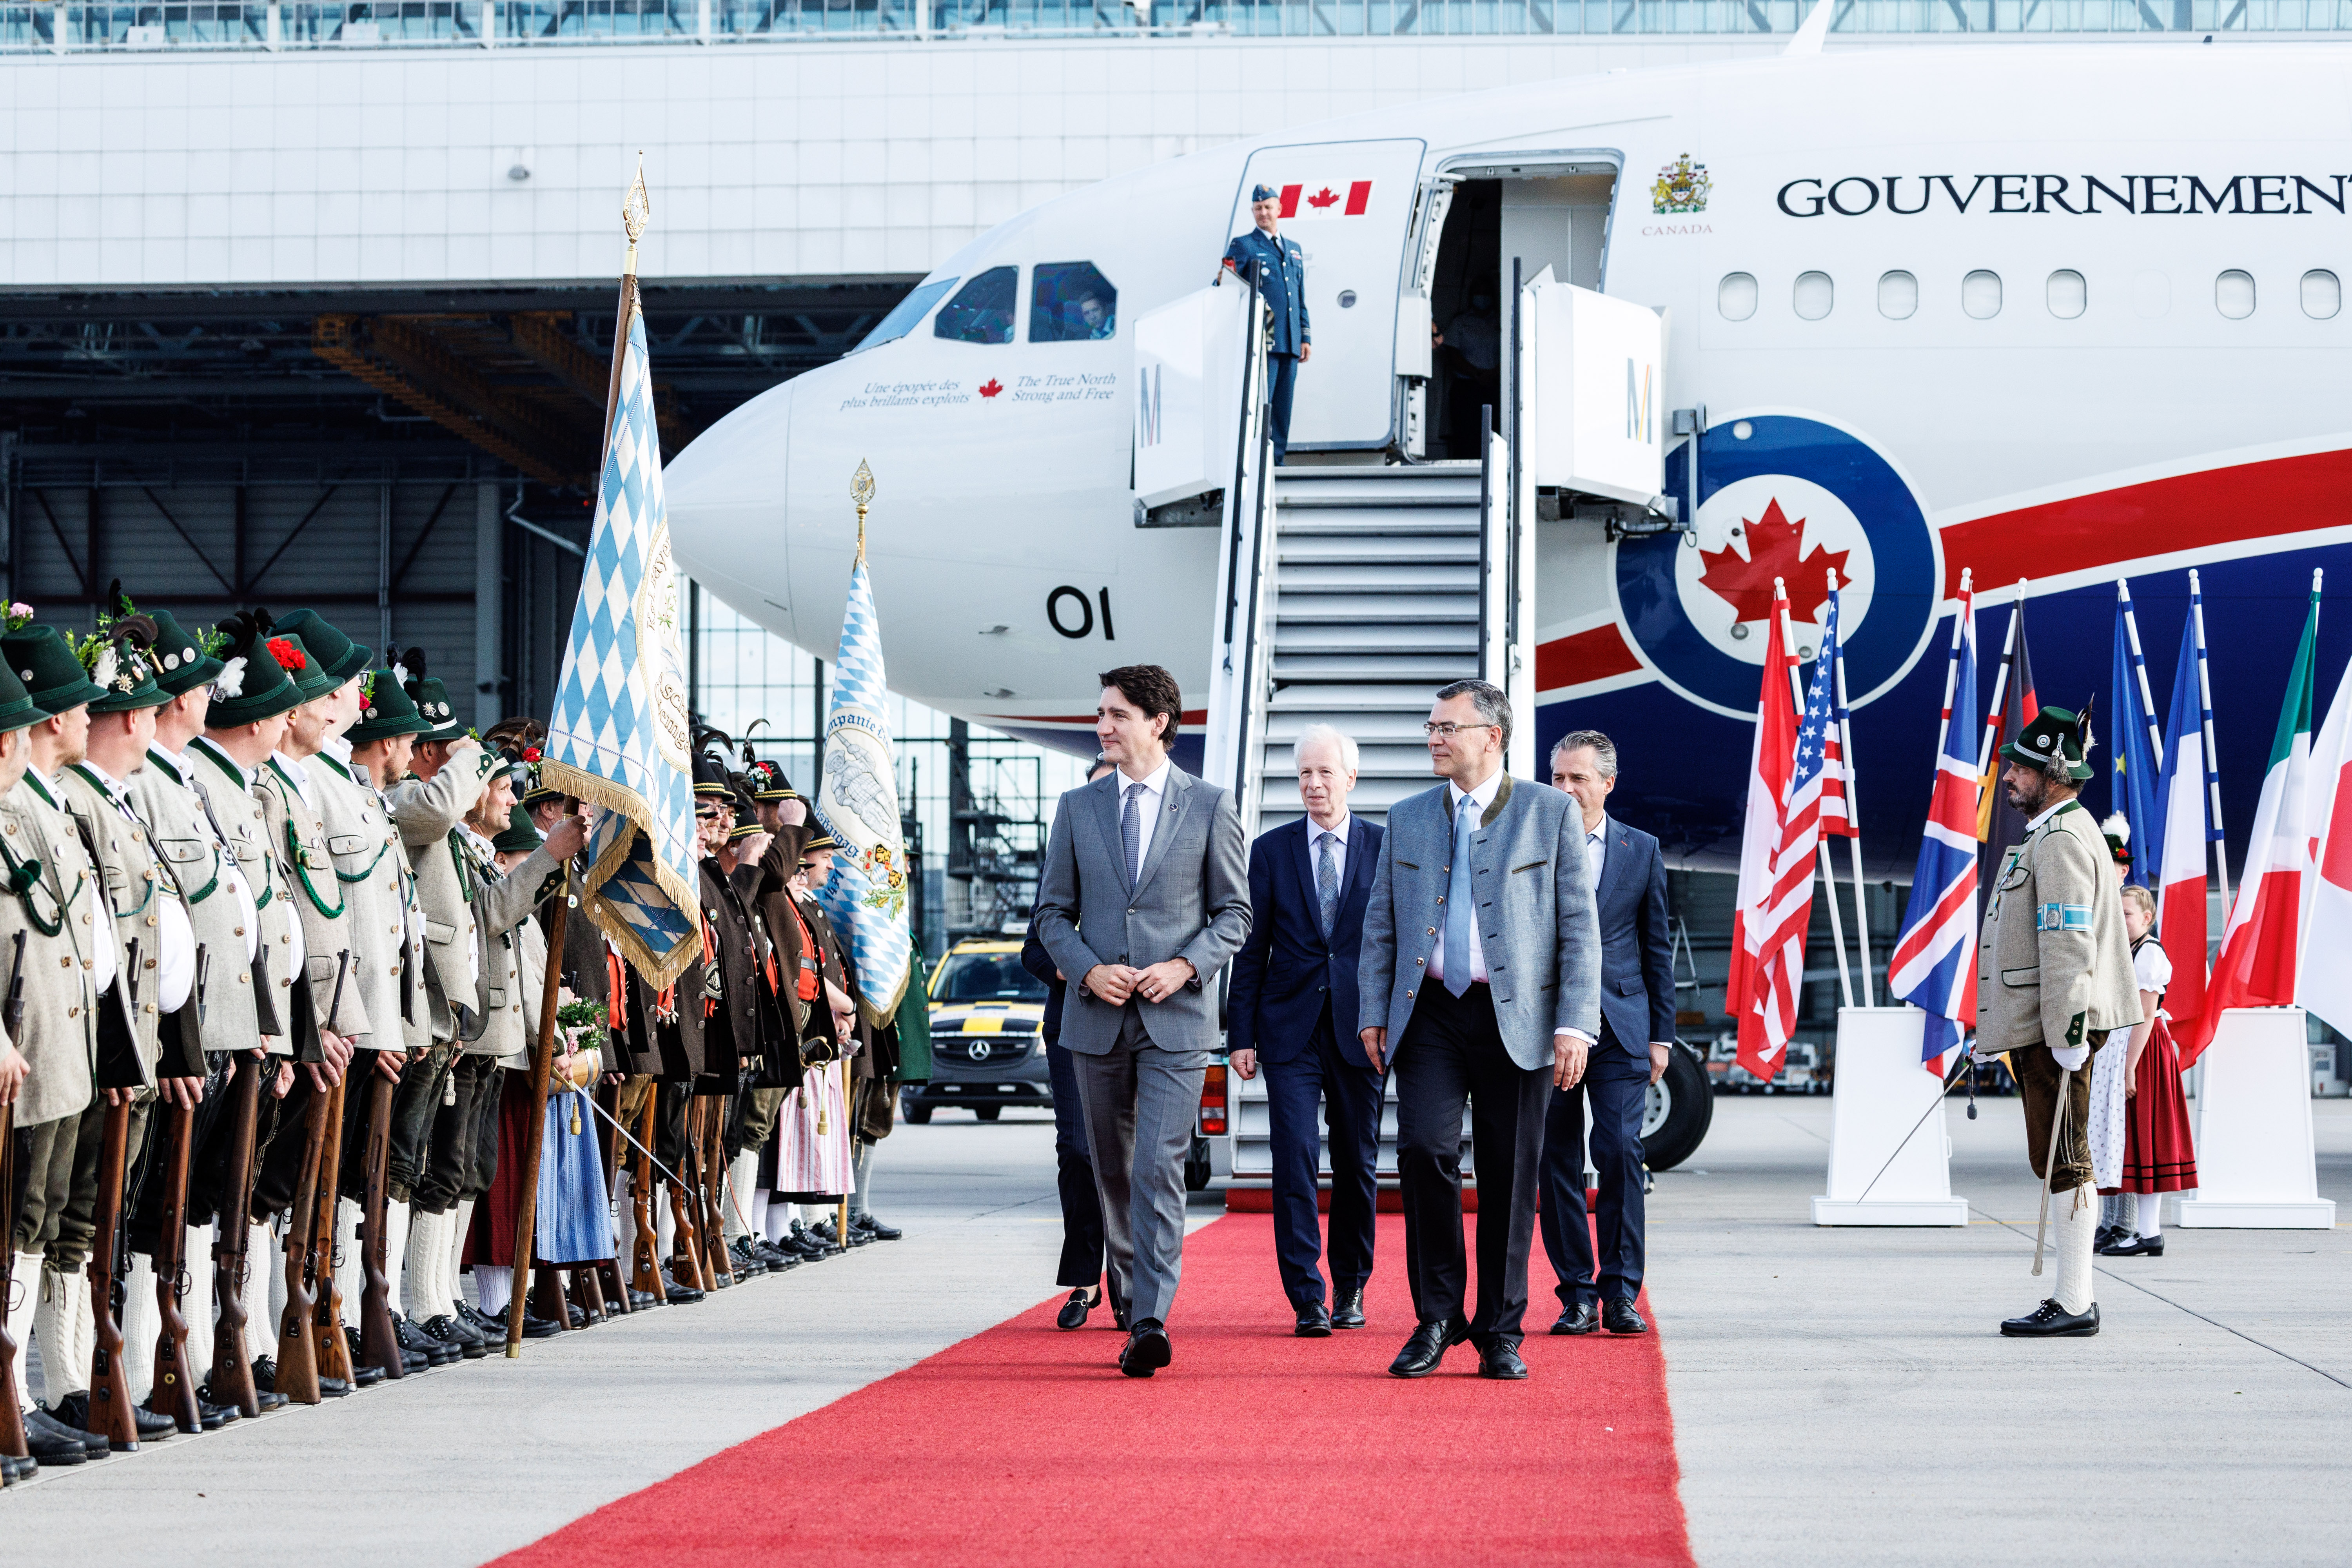 Justin Trudeau (Prime Minister of Canada) is welcomed at Munich Airport by members of a group wearing traditional Bavarian costume.